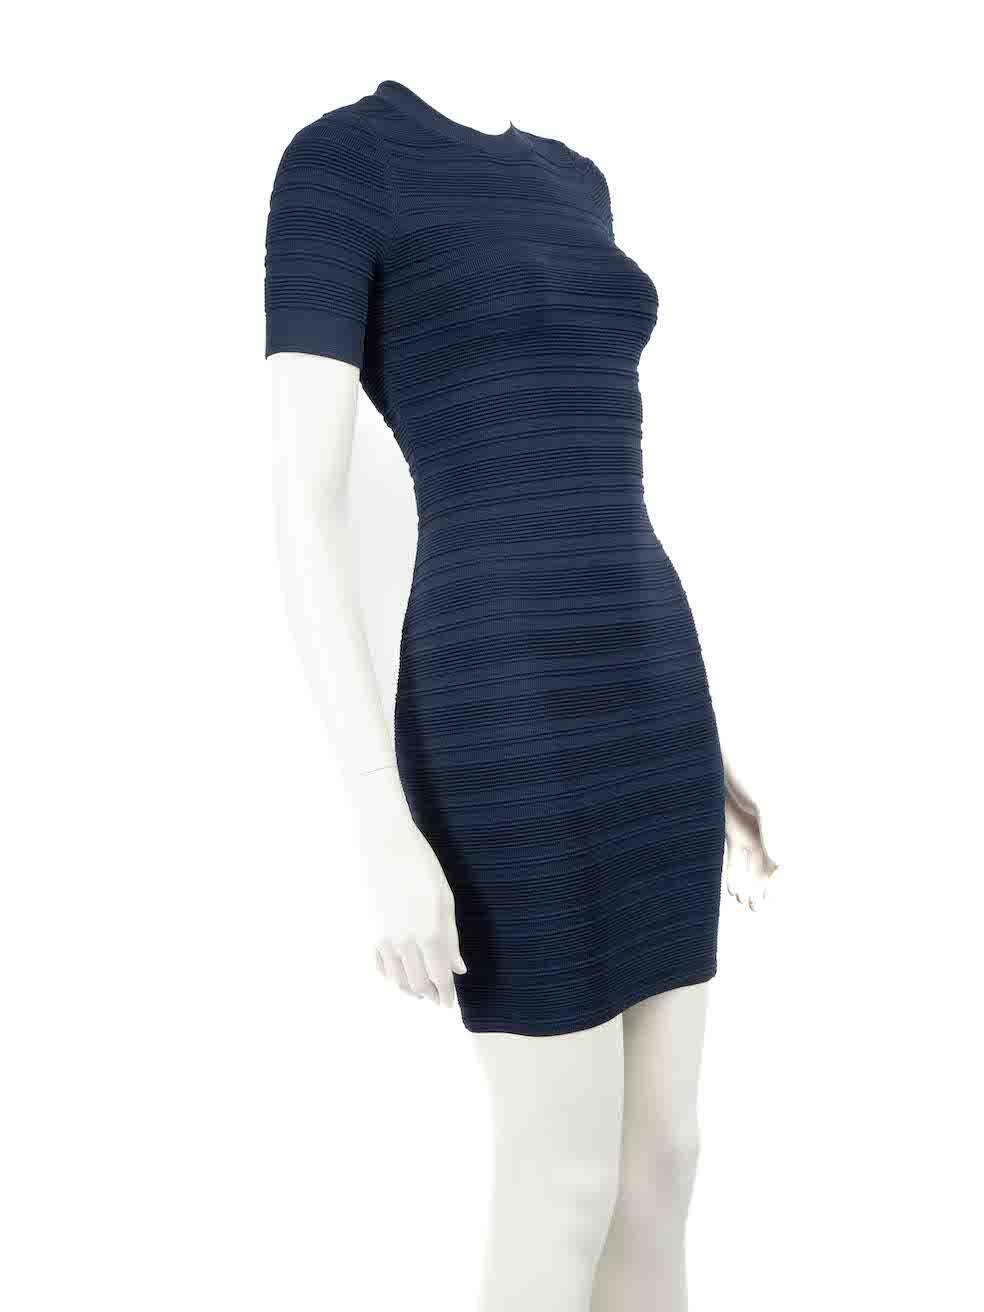 CONDITION is Never worn. No visible wear to dress is evident on this new Ronny Kobo designer resale item.
 
 
 
 Details
 
 
 Navy
 
 Viscose
 
 Knee length dress
 
 Striped
 
 Round neckline
 
 Bodycon and stretchy
 
 Back zip closure
 
 
 
 
 
